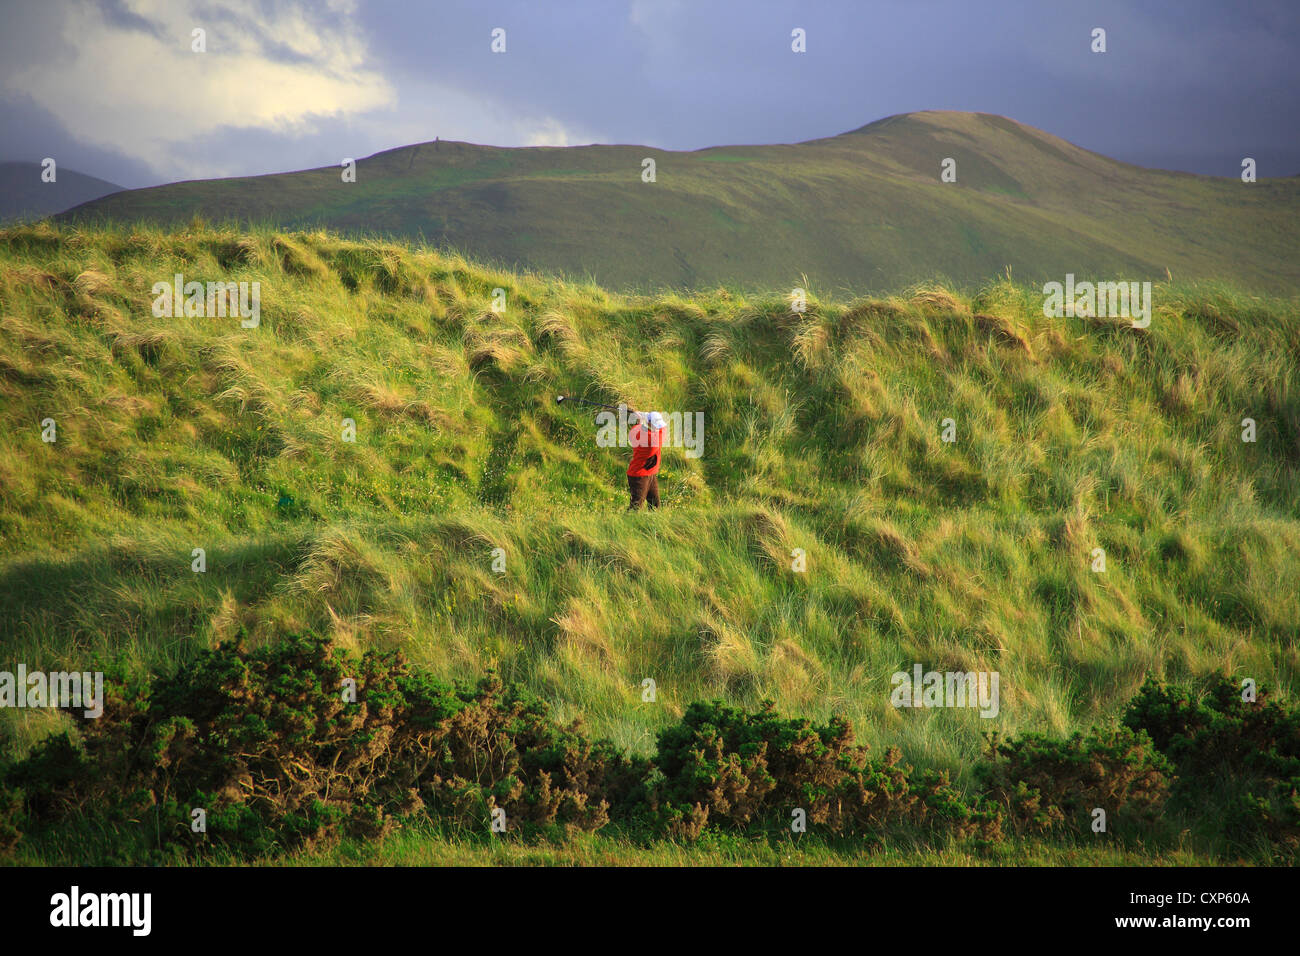 Man driving on links golf course, with big maram grass dunes. Stock Photo